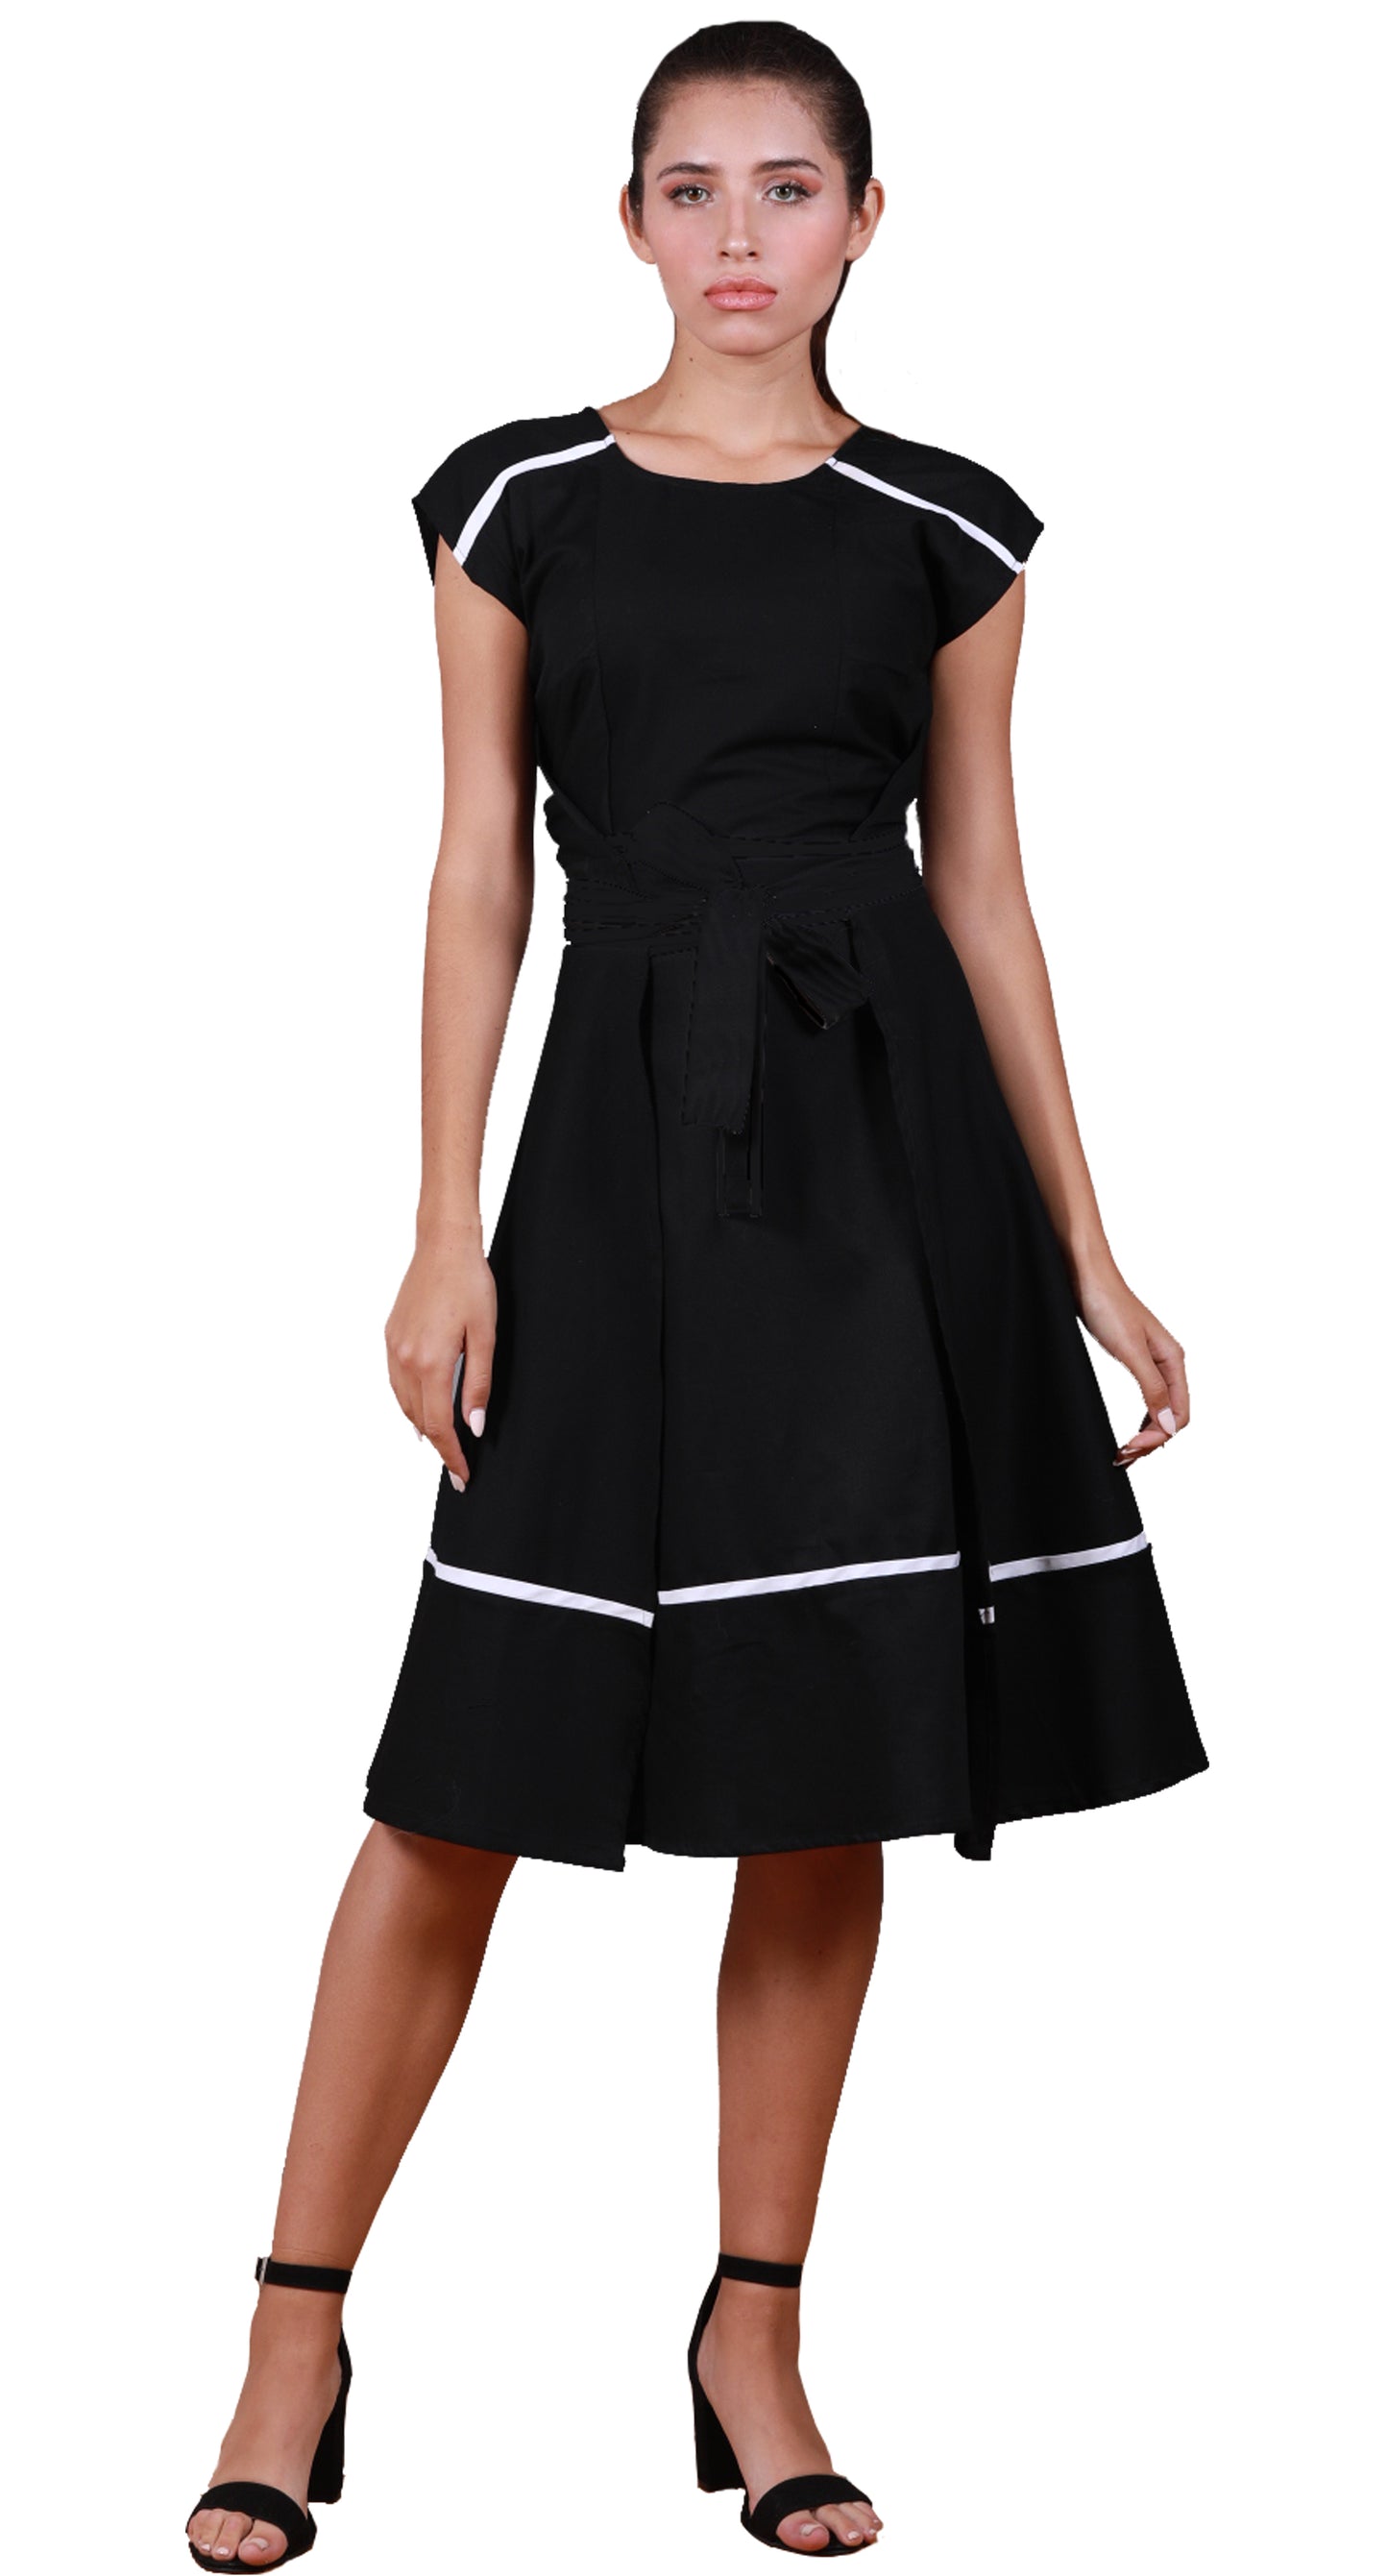 Wrap dress, two fronts, with white bias on shoulder yoke and skirt.